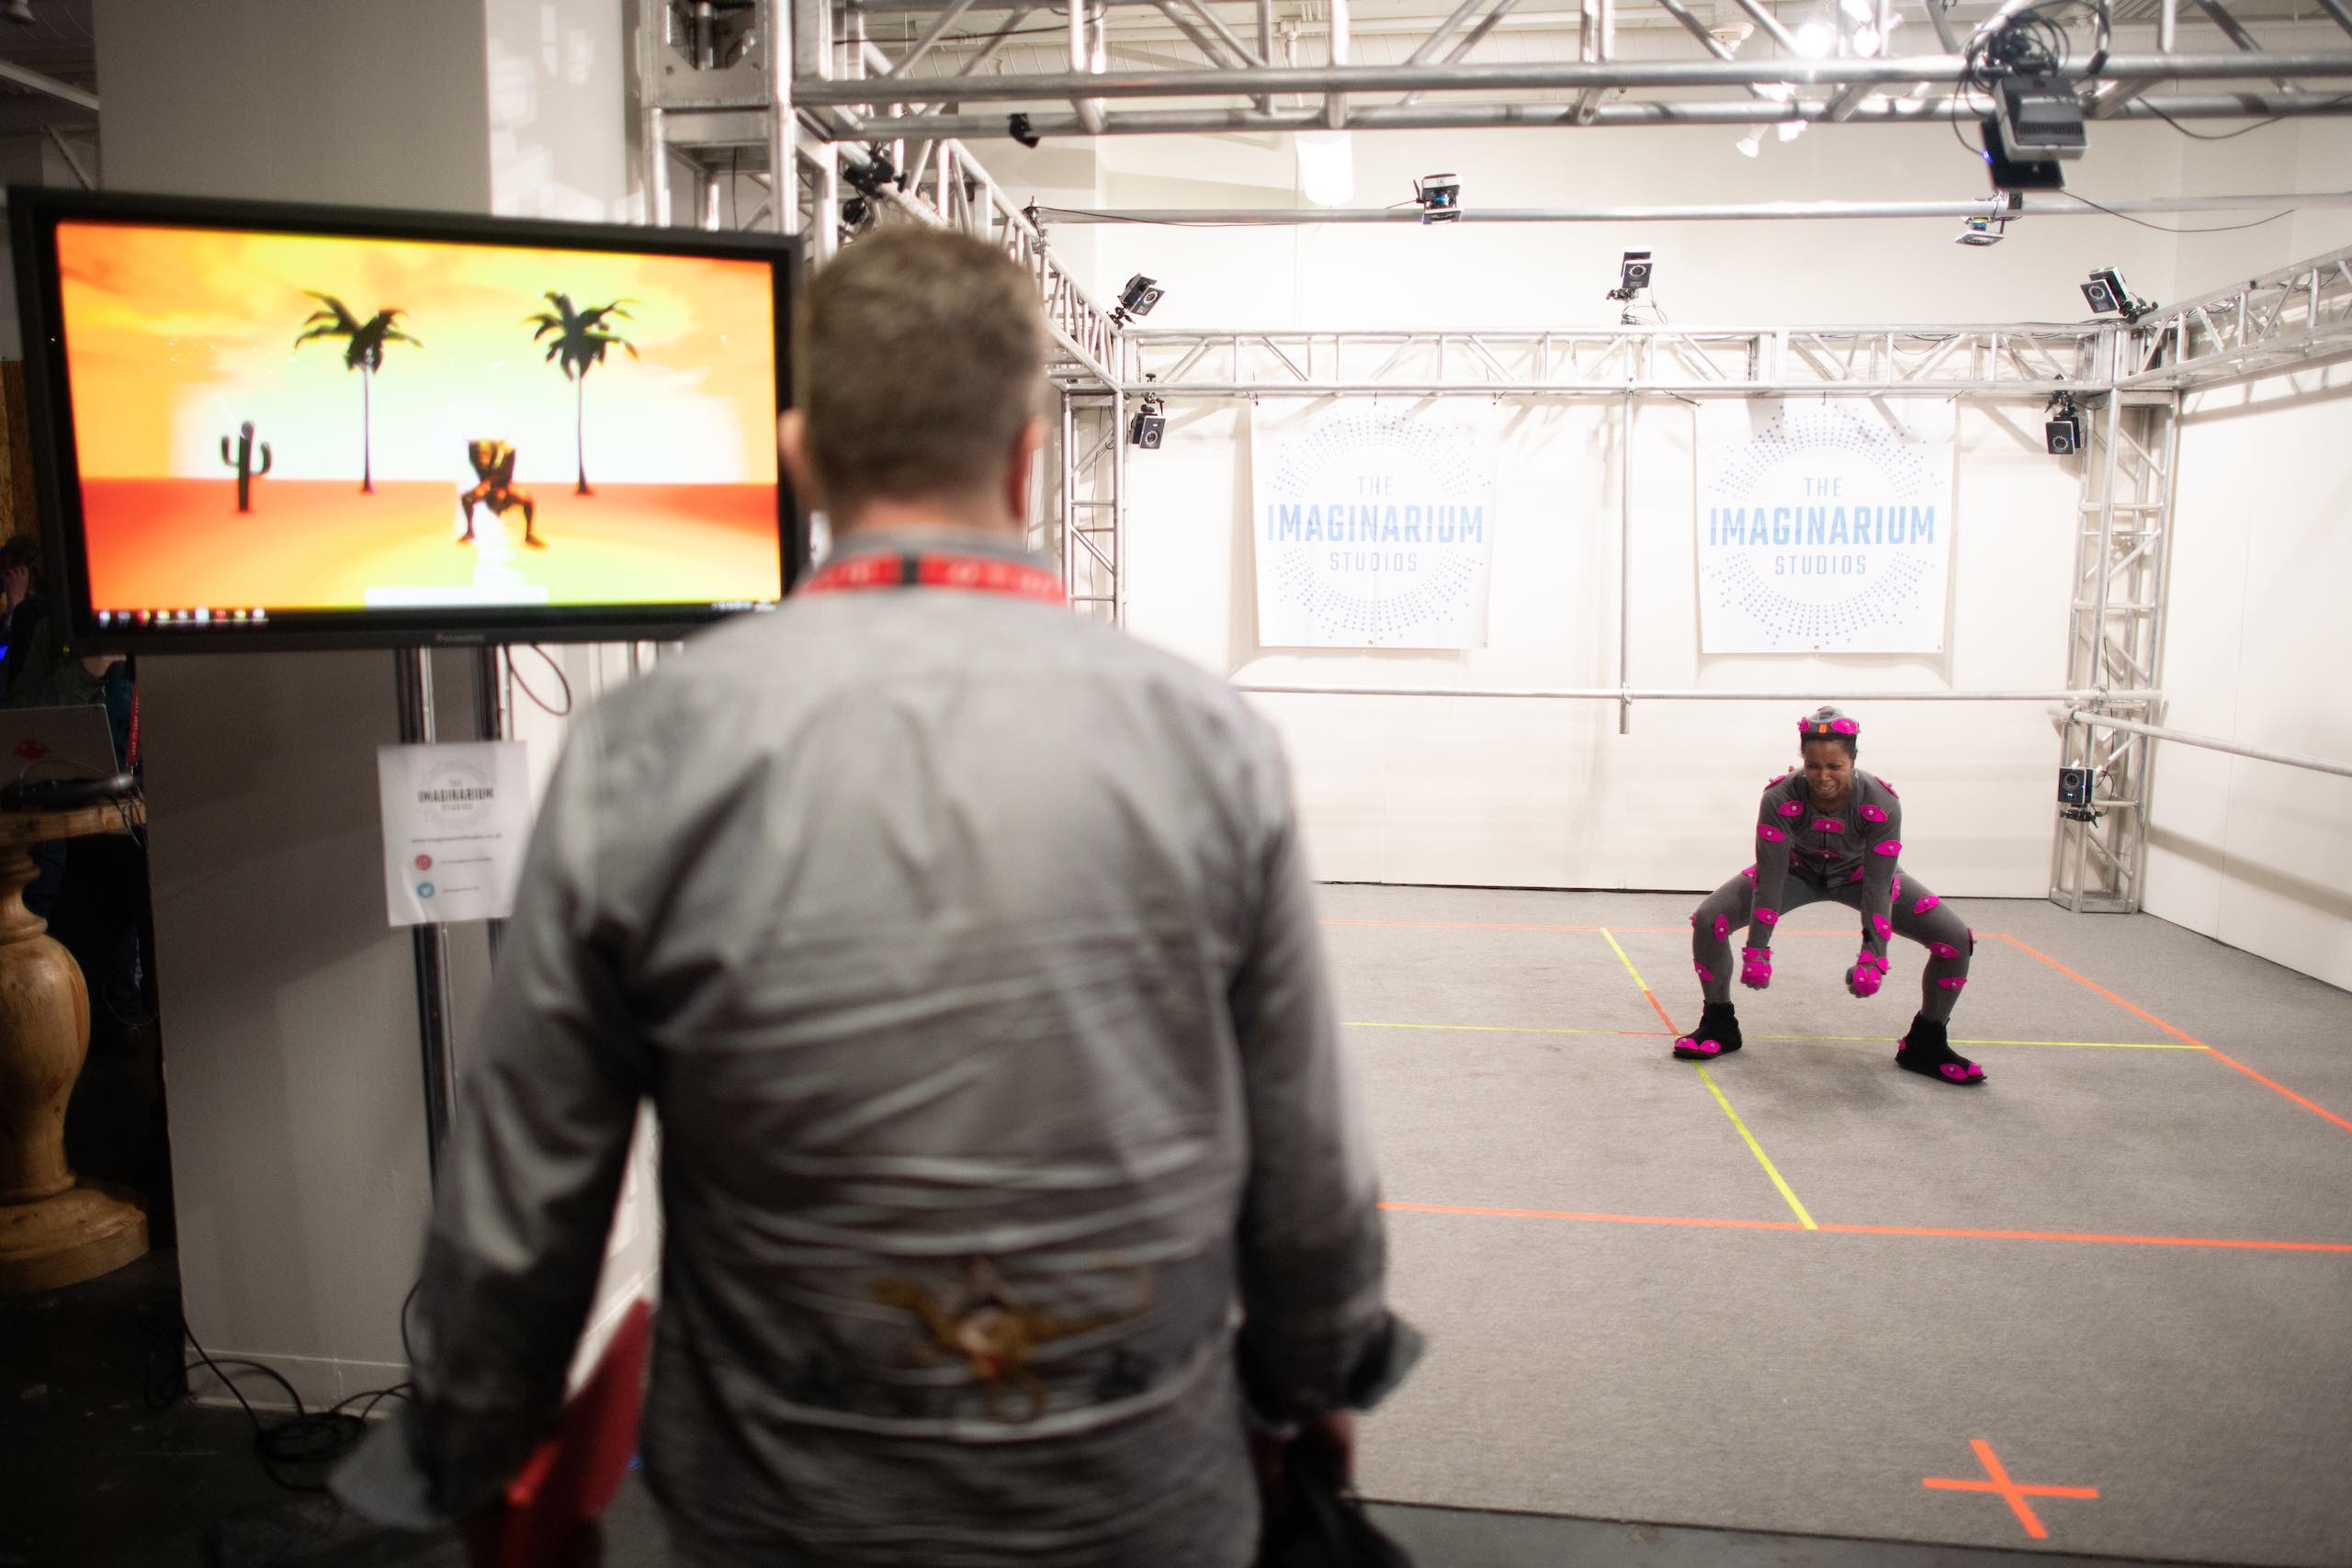 Woman with pink body movement sensors doing moves while man views a monitor with character mimicking her moves in The Imaginarium Studios